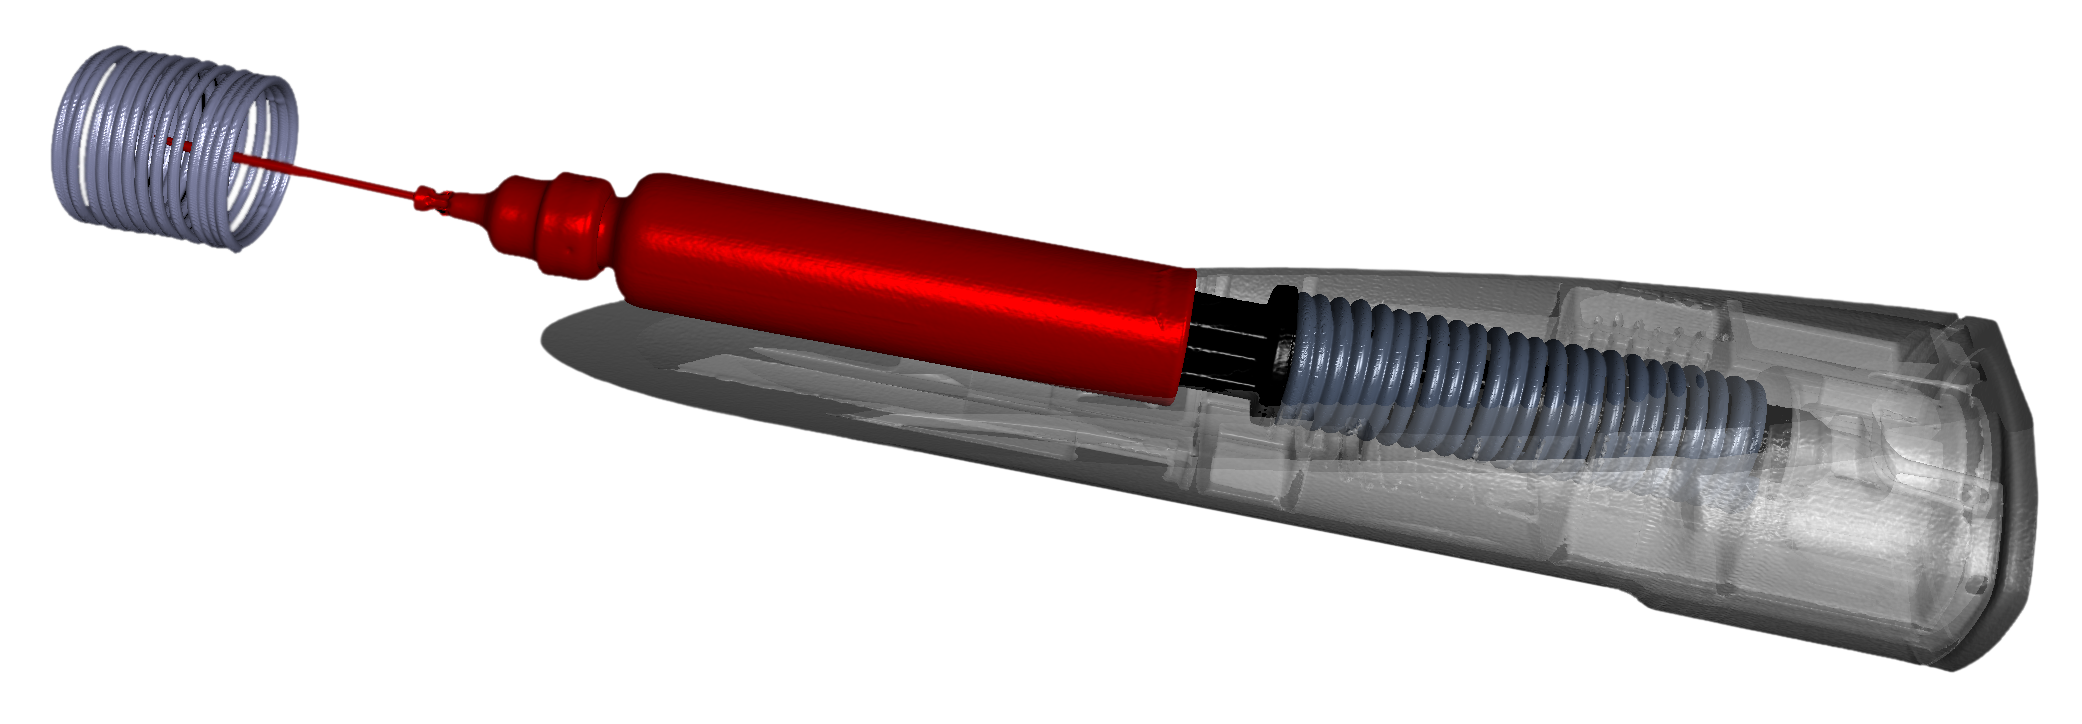 X-ray inspection of an epipen